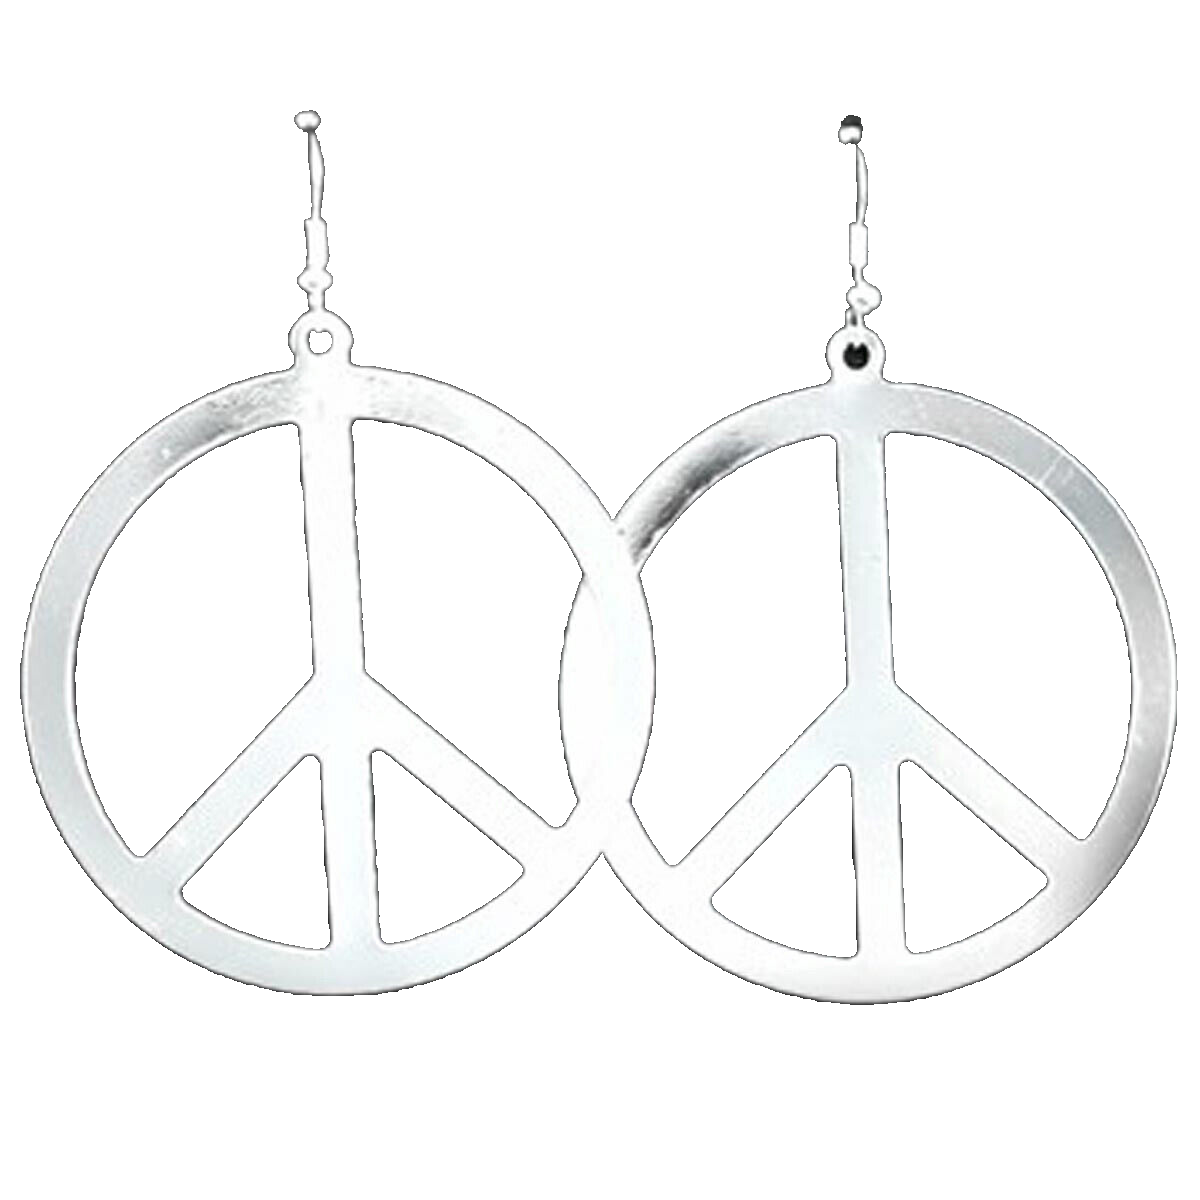 Big Funky Vintage PEACE SIGN EARRINGS Retro Hippy Costume Jewelry - SILVER Metal - $8.79